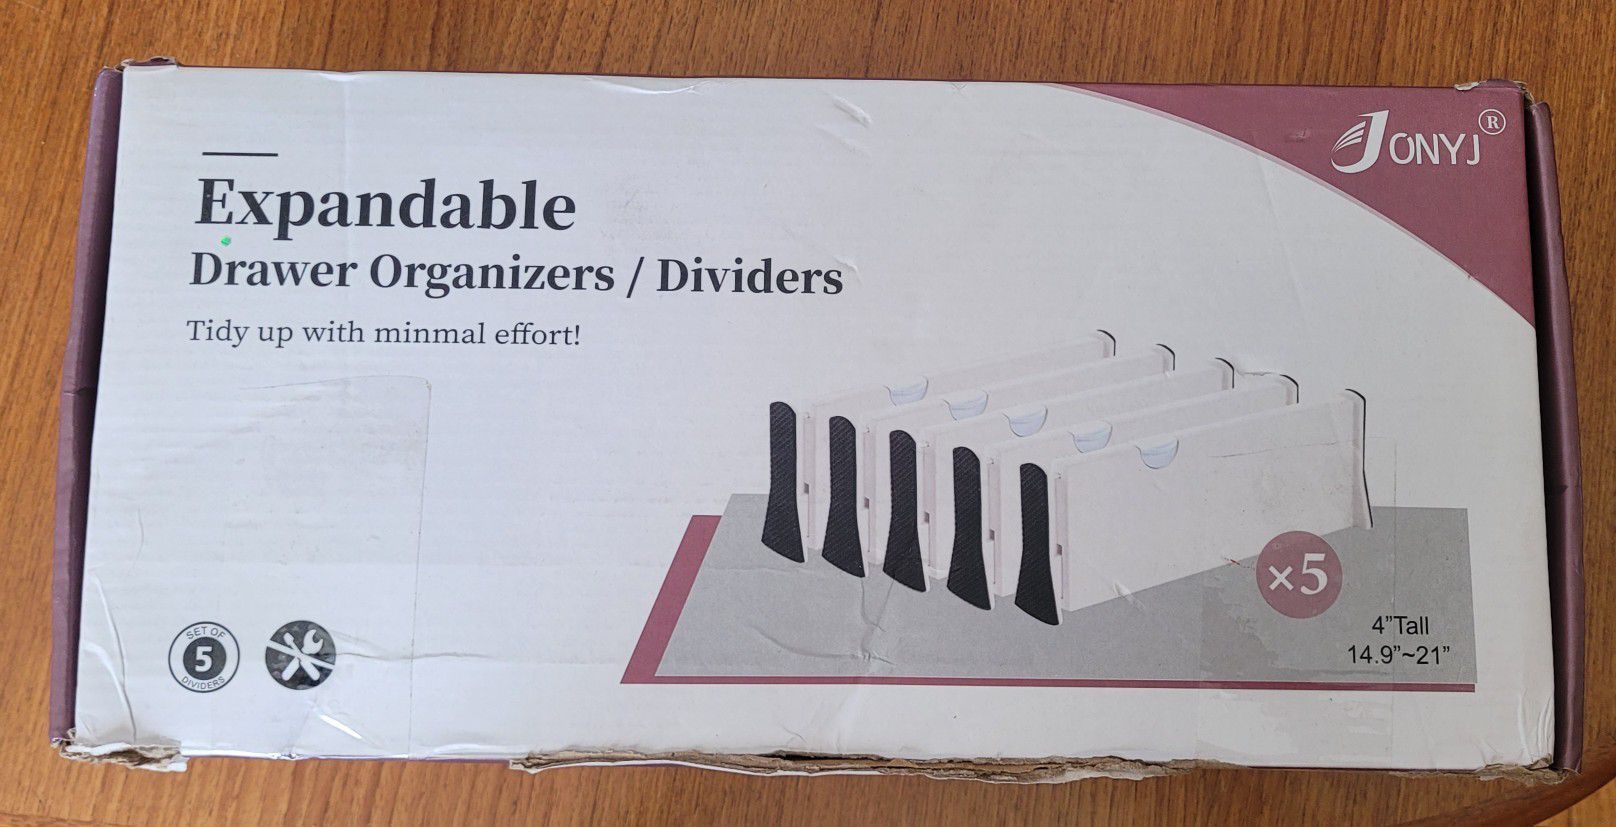 Expandable Drawer Organizers/Dividers NEW  $20. Pick-up In Aurora.  Check My Other Great Deals In My Profile -Thank You!